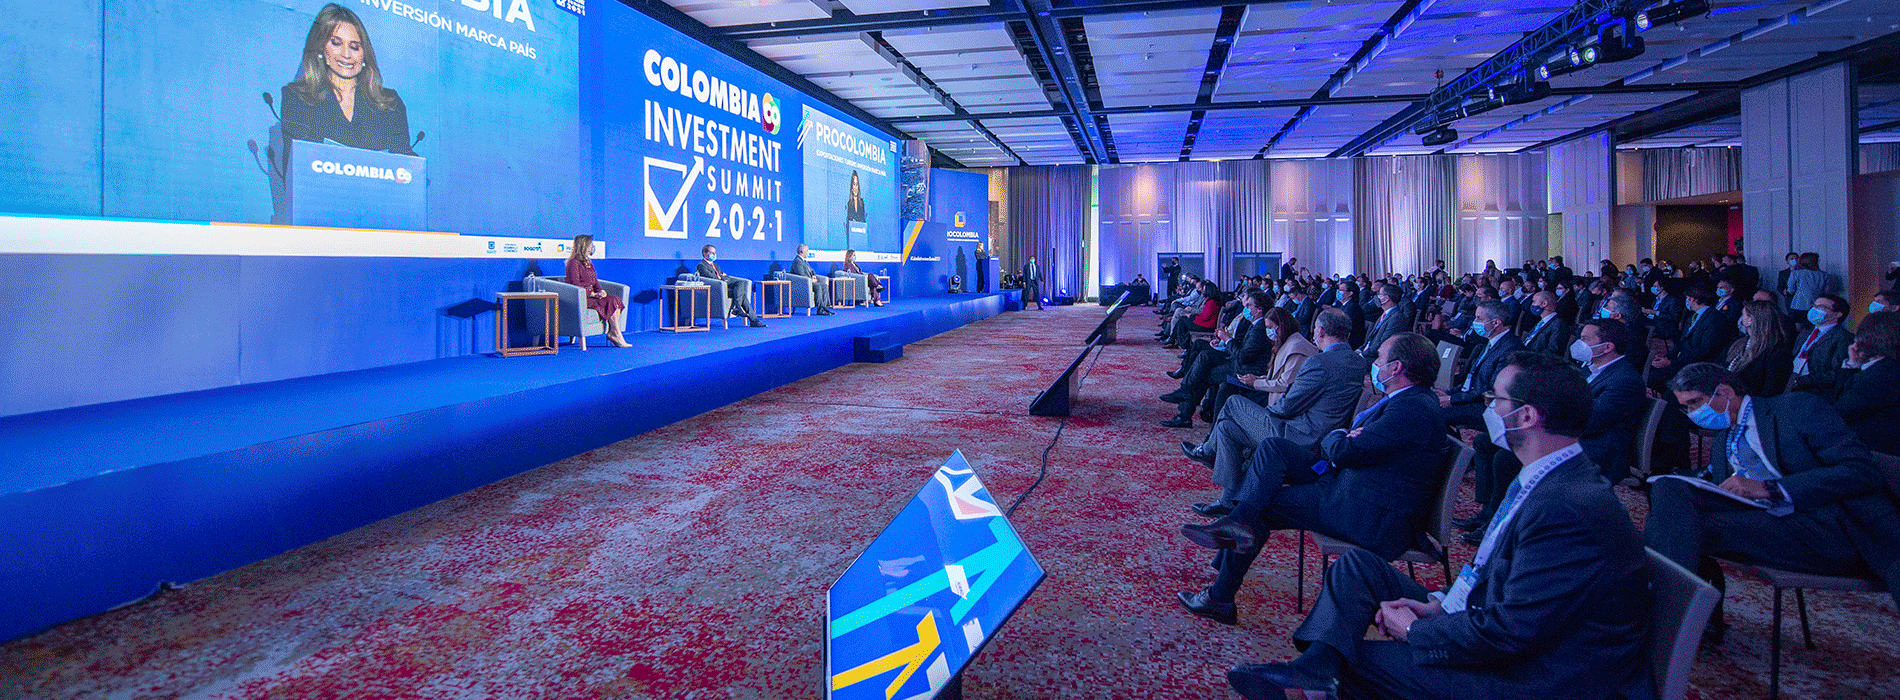 This November 20th marks the beginning of the Colombia Investment Summit 202